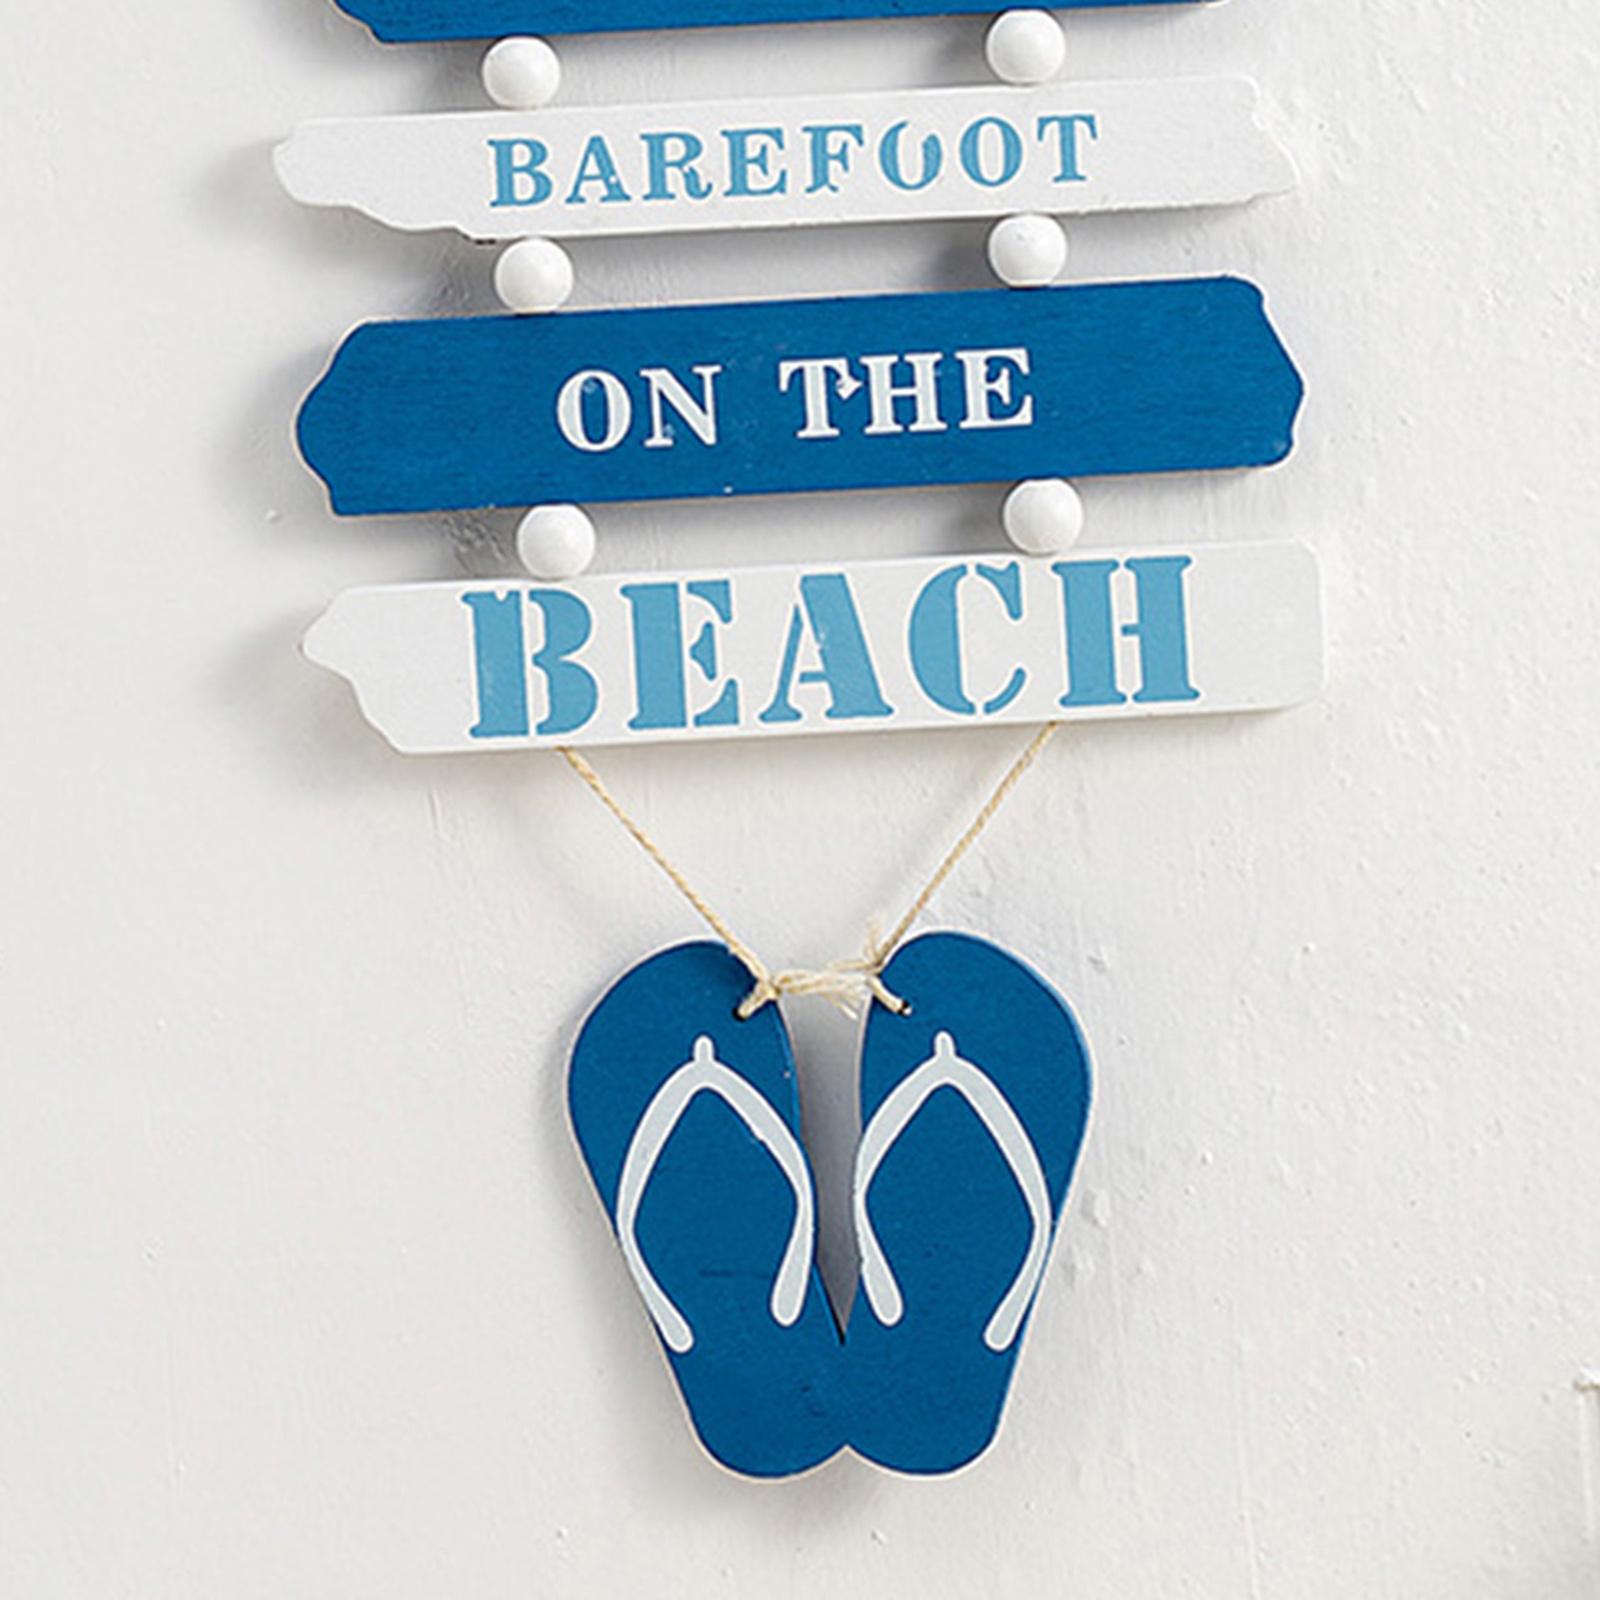 Wooden Hanging Beach Plaque Door Wall Plaque Decor Sign with Hanging Rope Wood Wall Decorative Sign Ornament Decoration